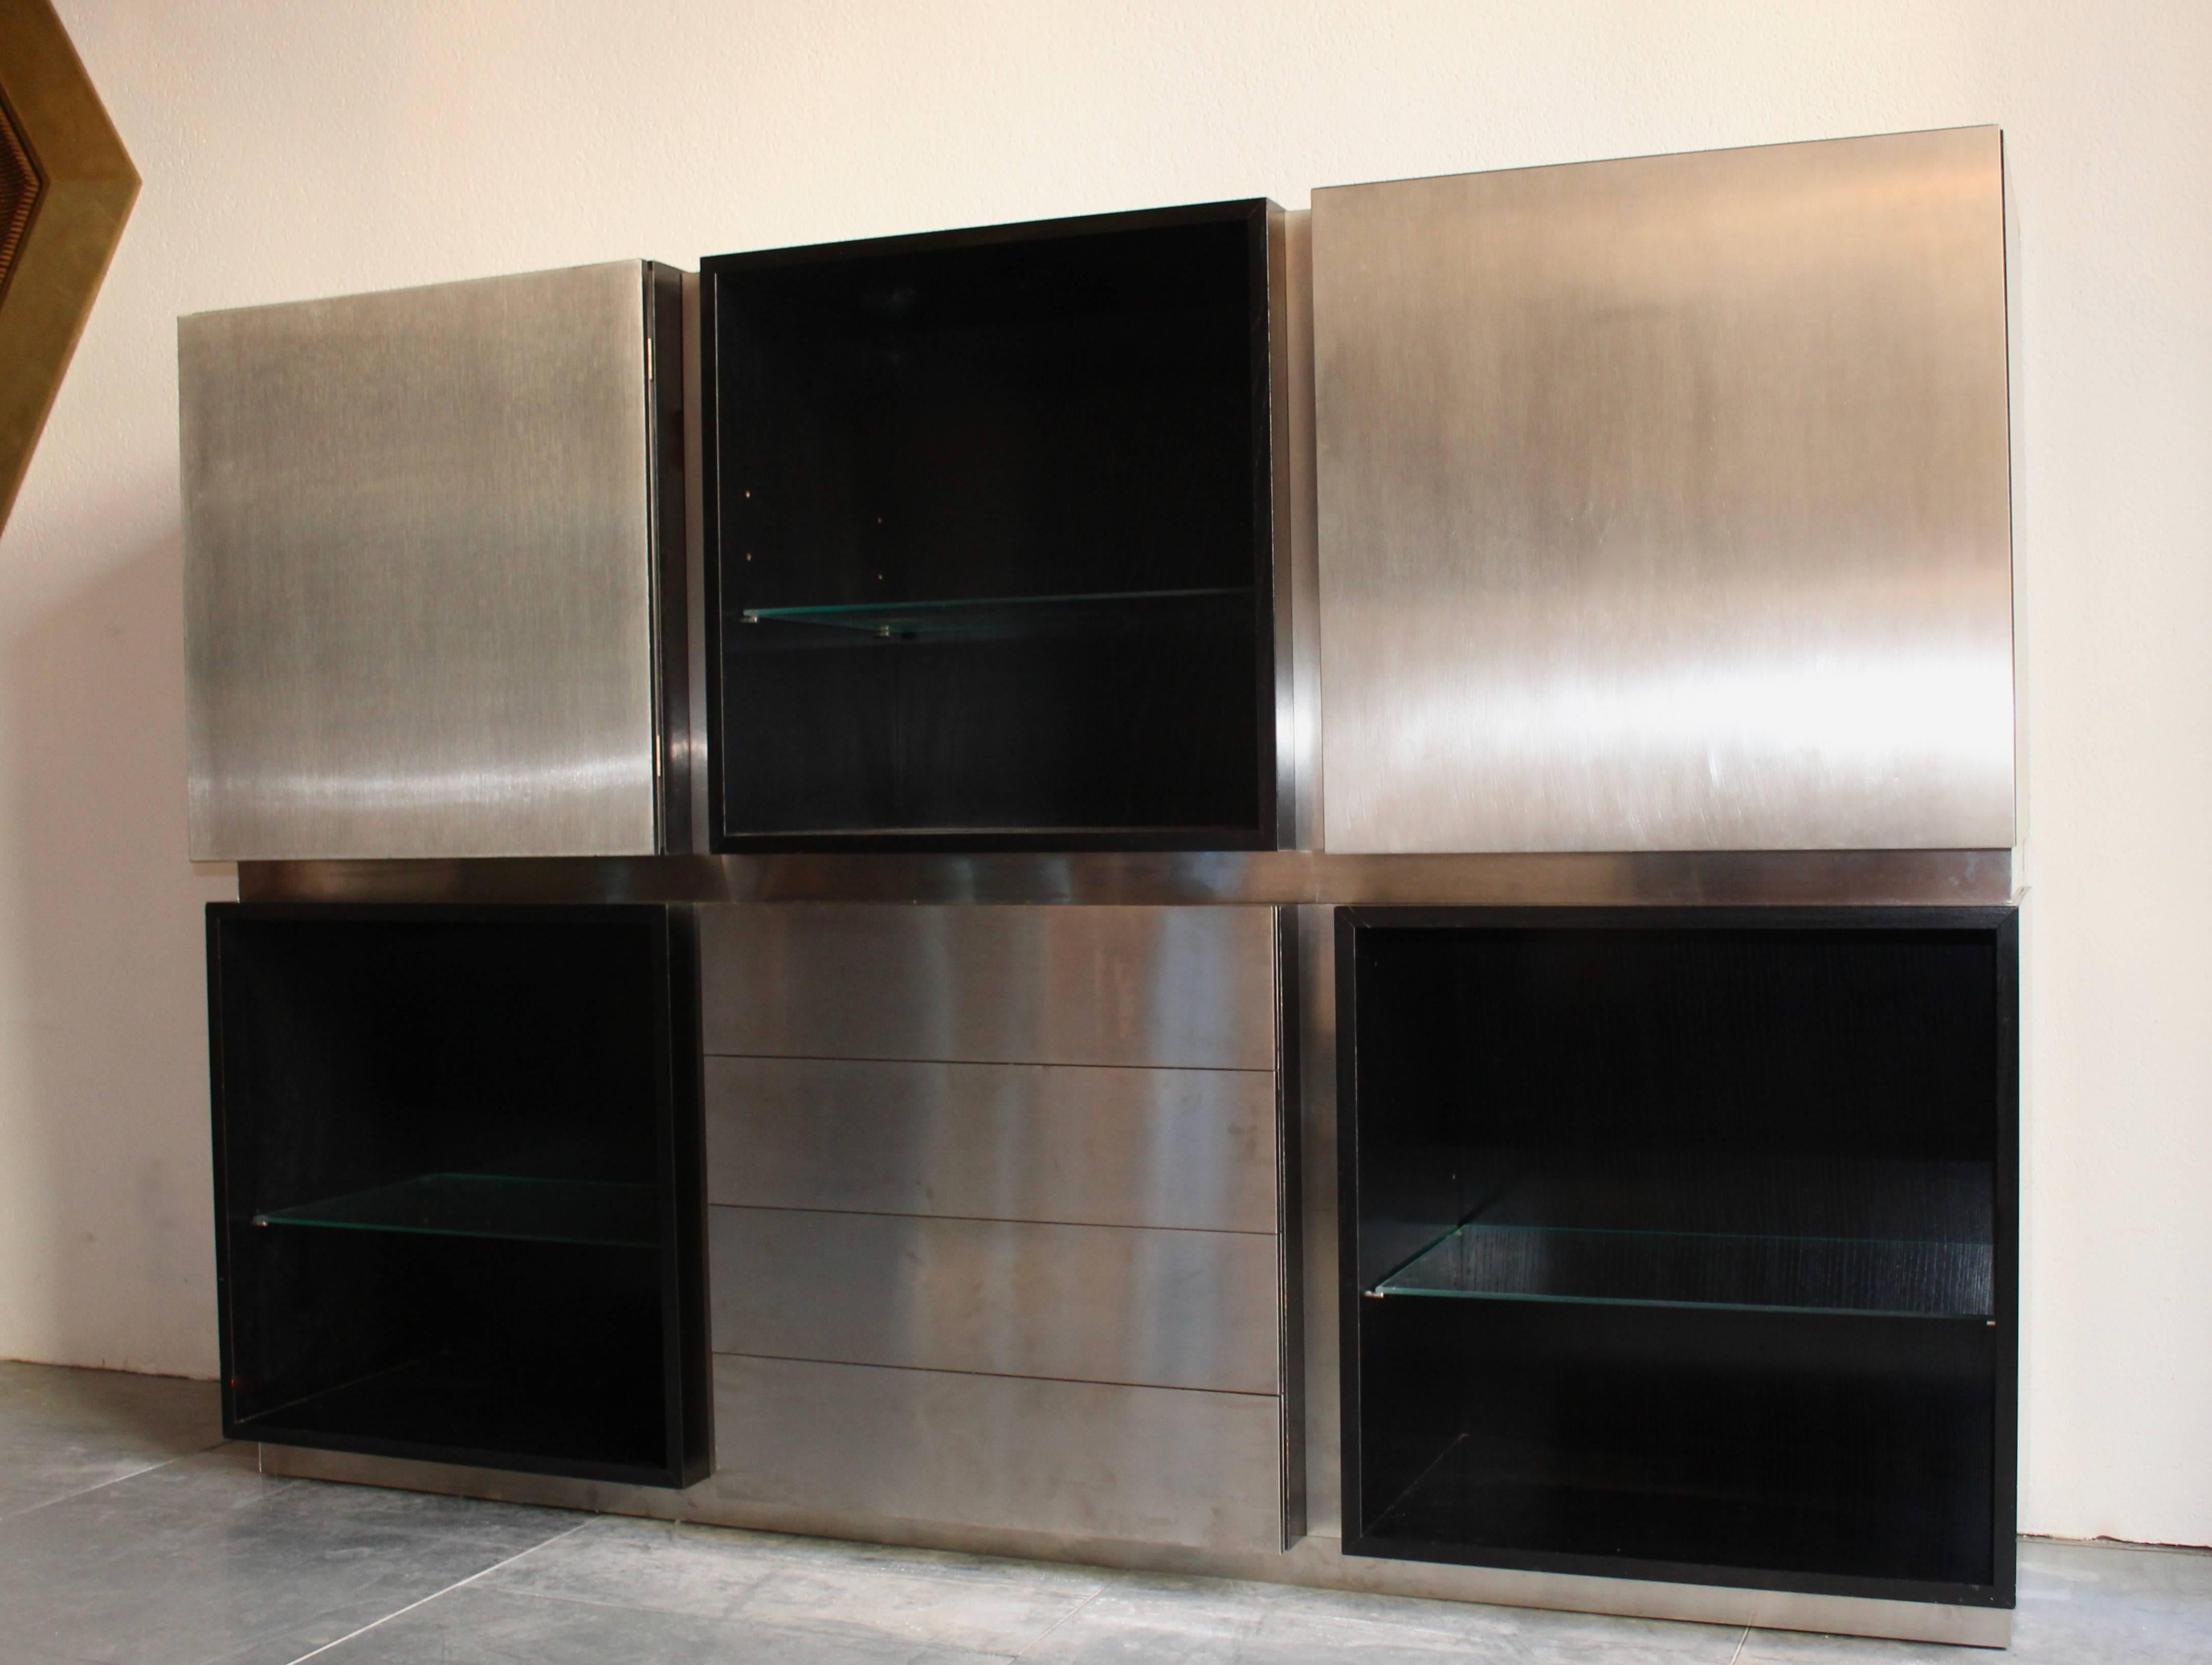 Acerbis sideboard in stained oak and stainless steel, Italy, 1970s.
Beautiful black oak furniture and stainless steel door, possibility to modulate the furniture.